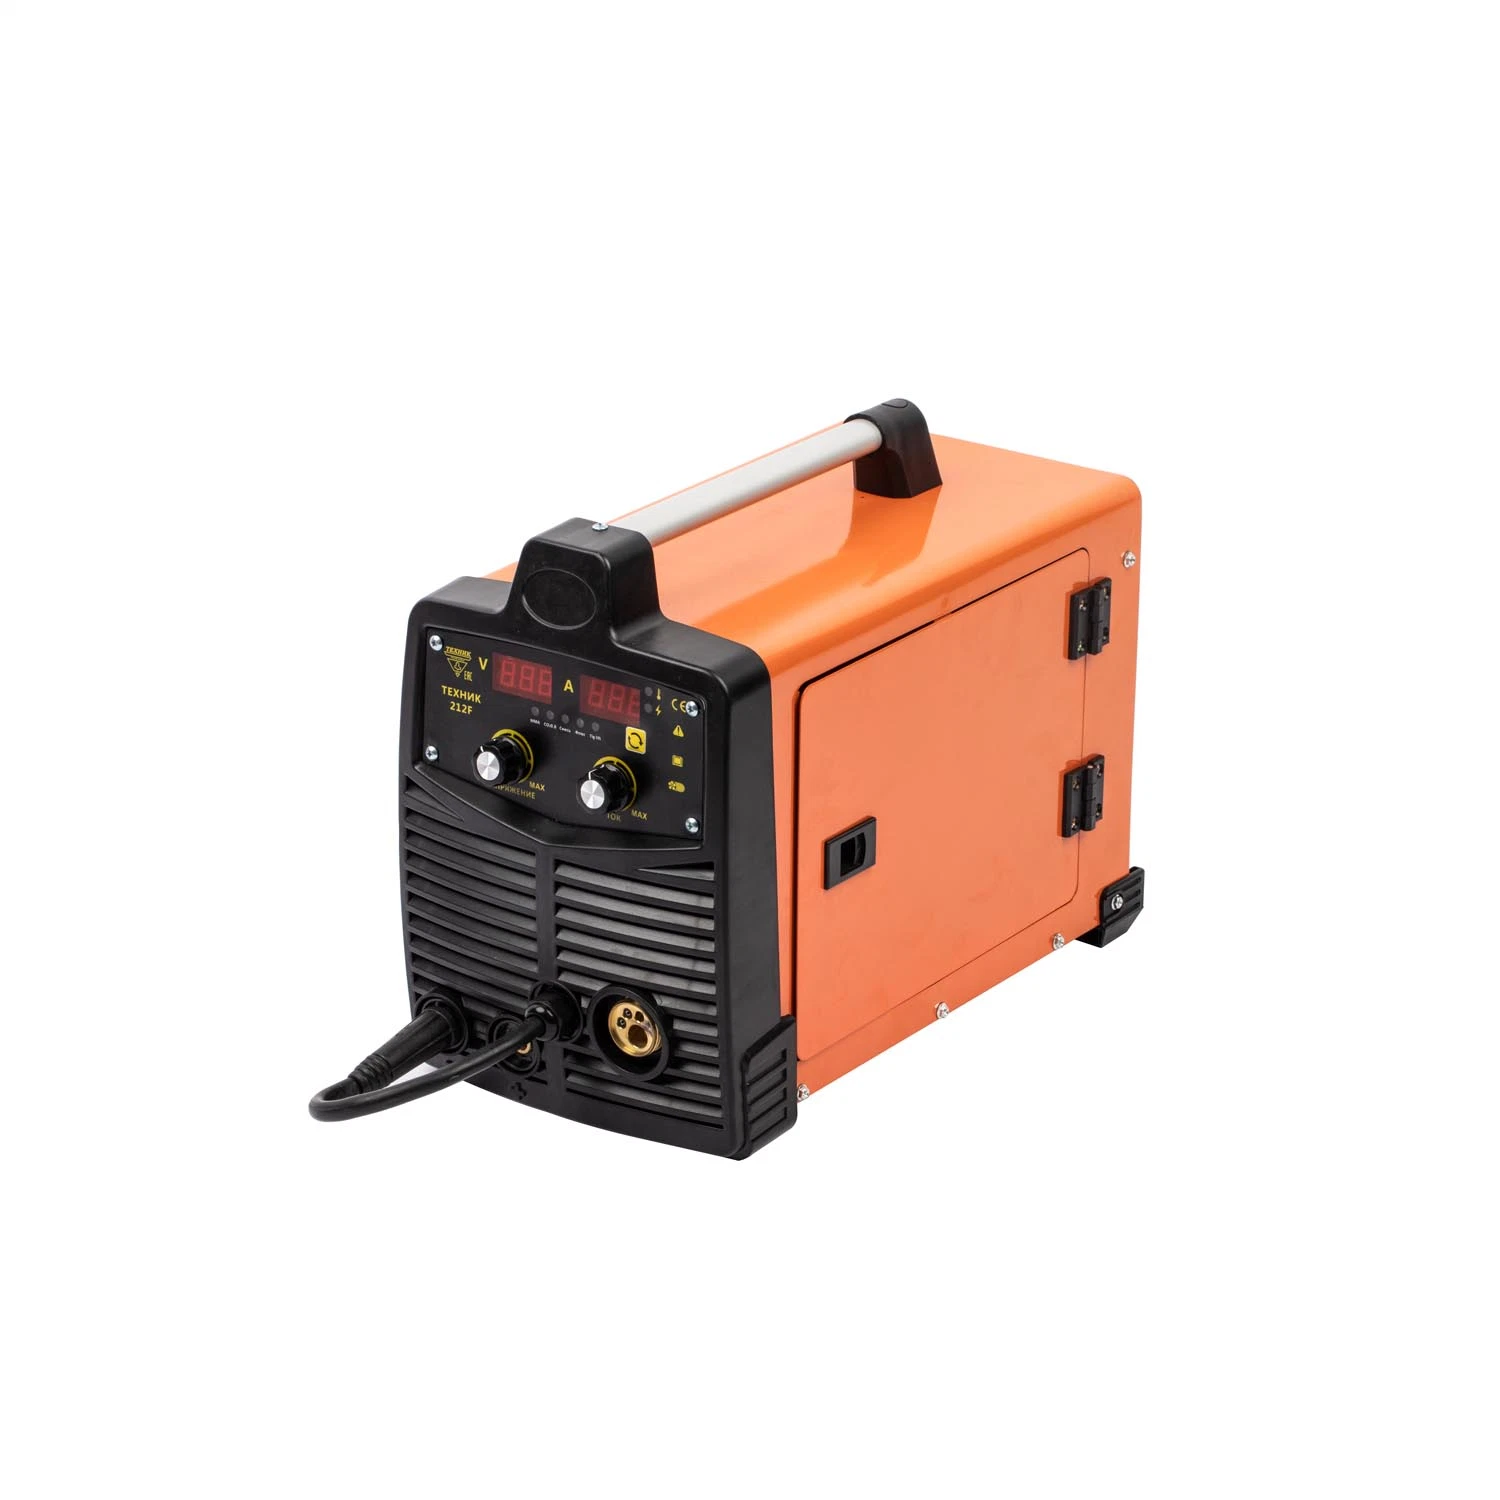 MIG Welder Eco160 with Digital 220V 1p Welding Equipment MB15ak MIG Torch with 4 M Cable